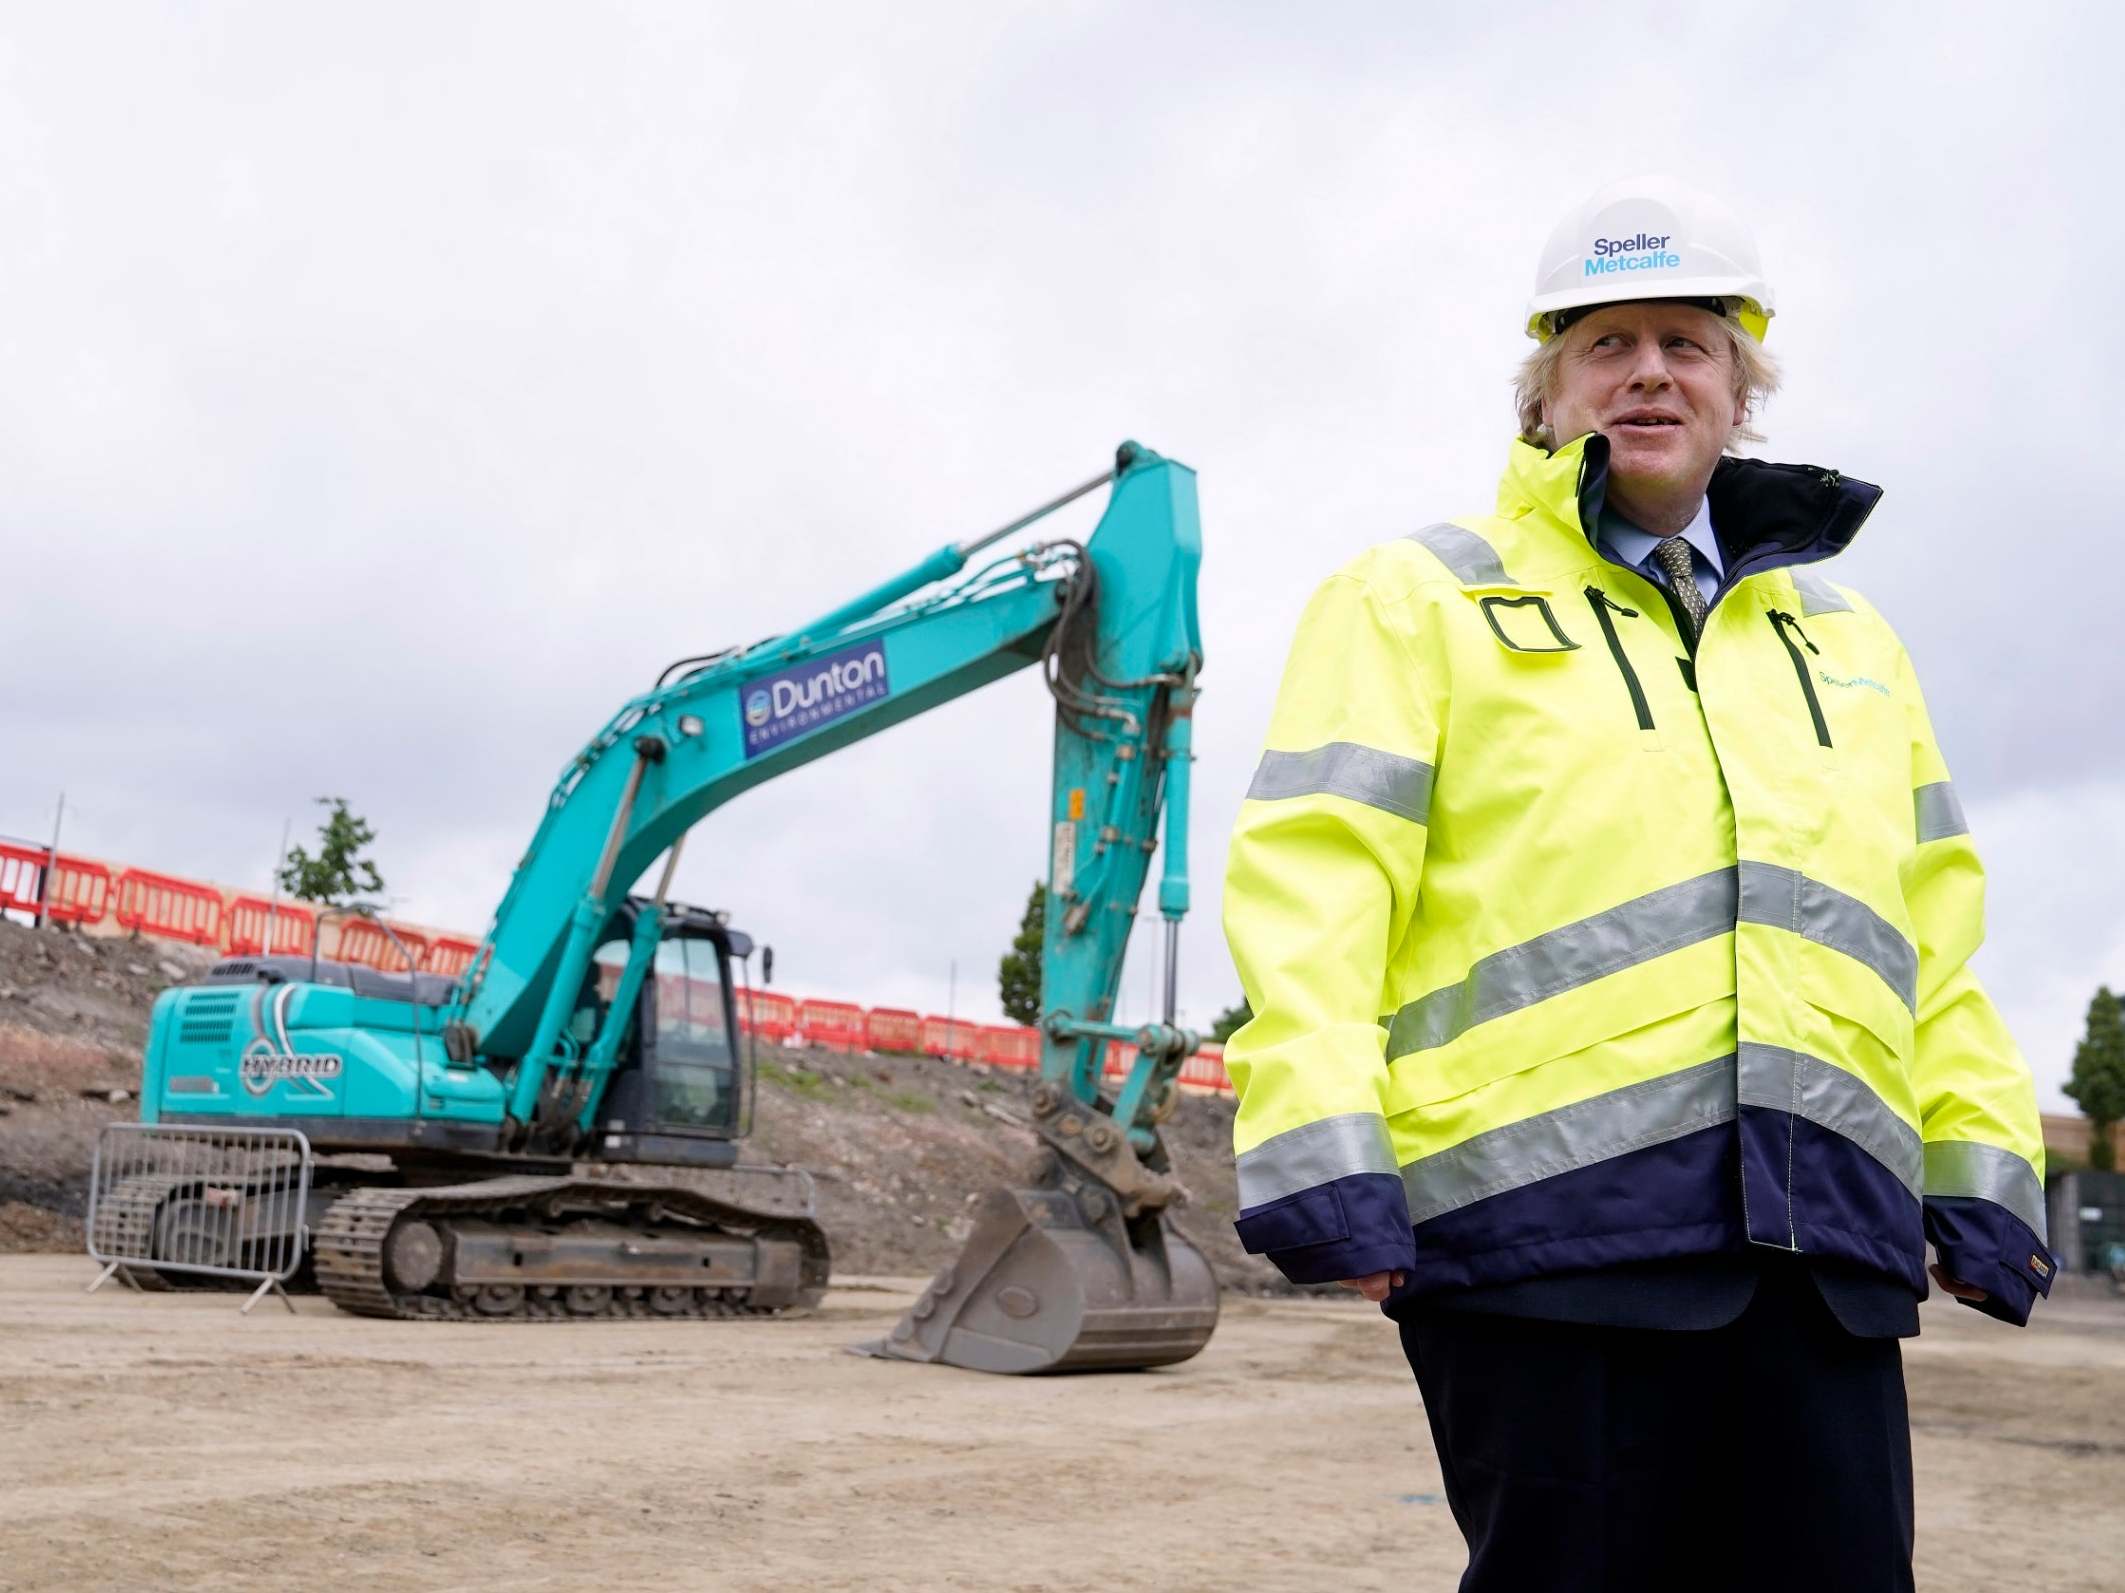 While Boris Johnson poses in a hard hat, the nation is forgetting about its ambitions for women